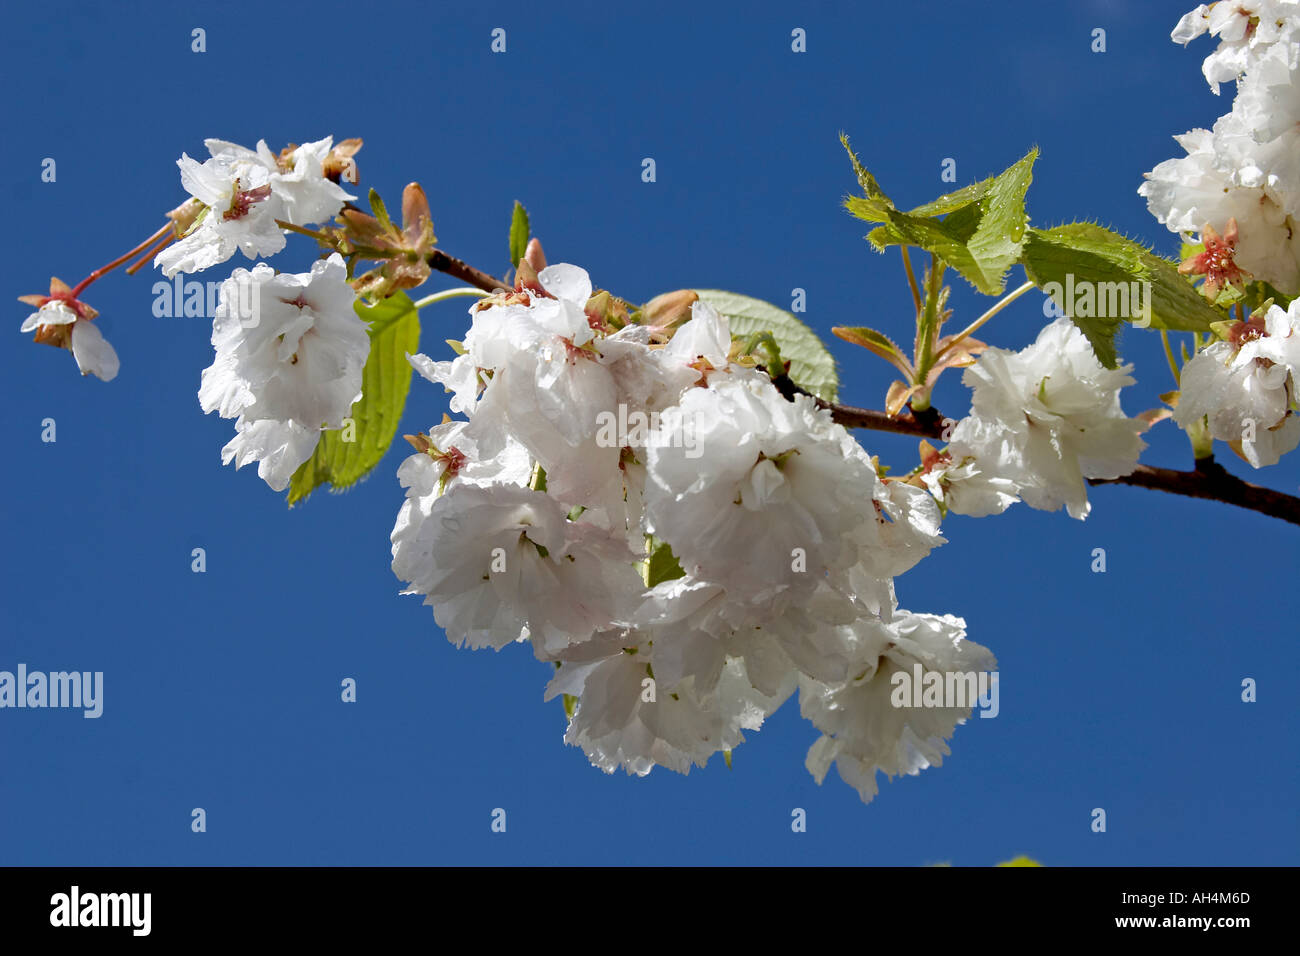 White cherry tree blossom against blue sky Muswell Hill London N10 England  Stock Photo